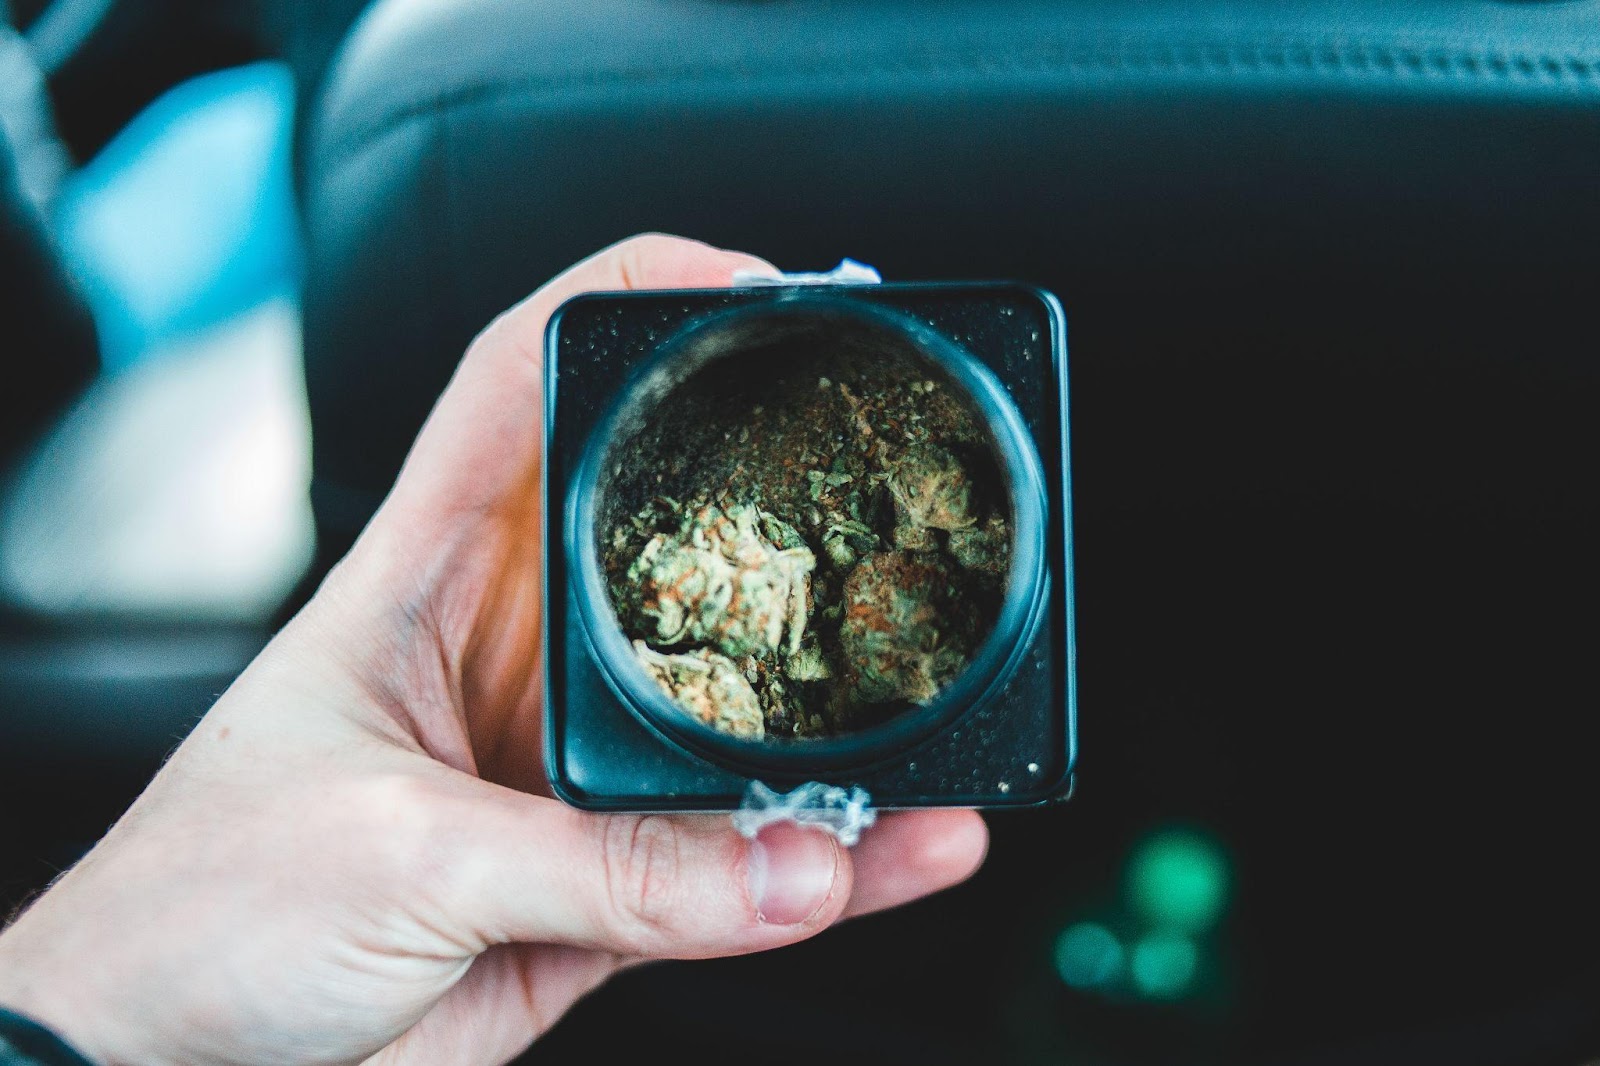 a container filled with weed